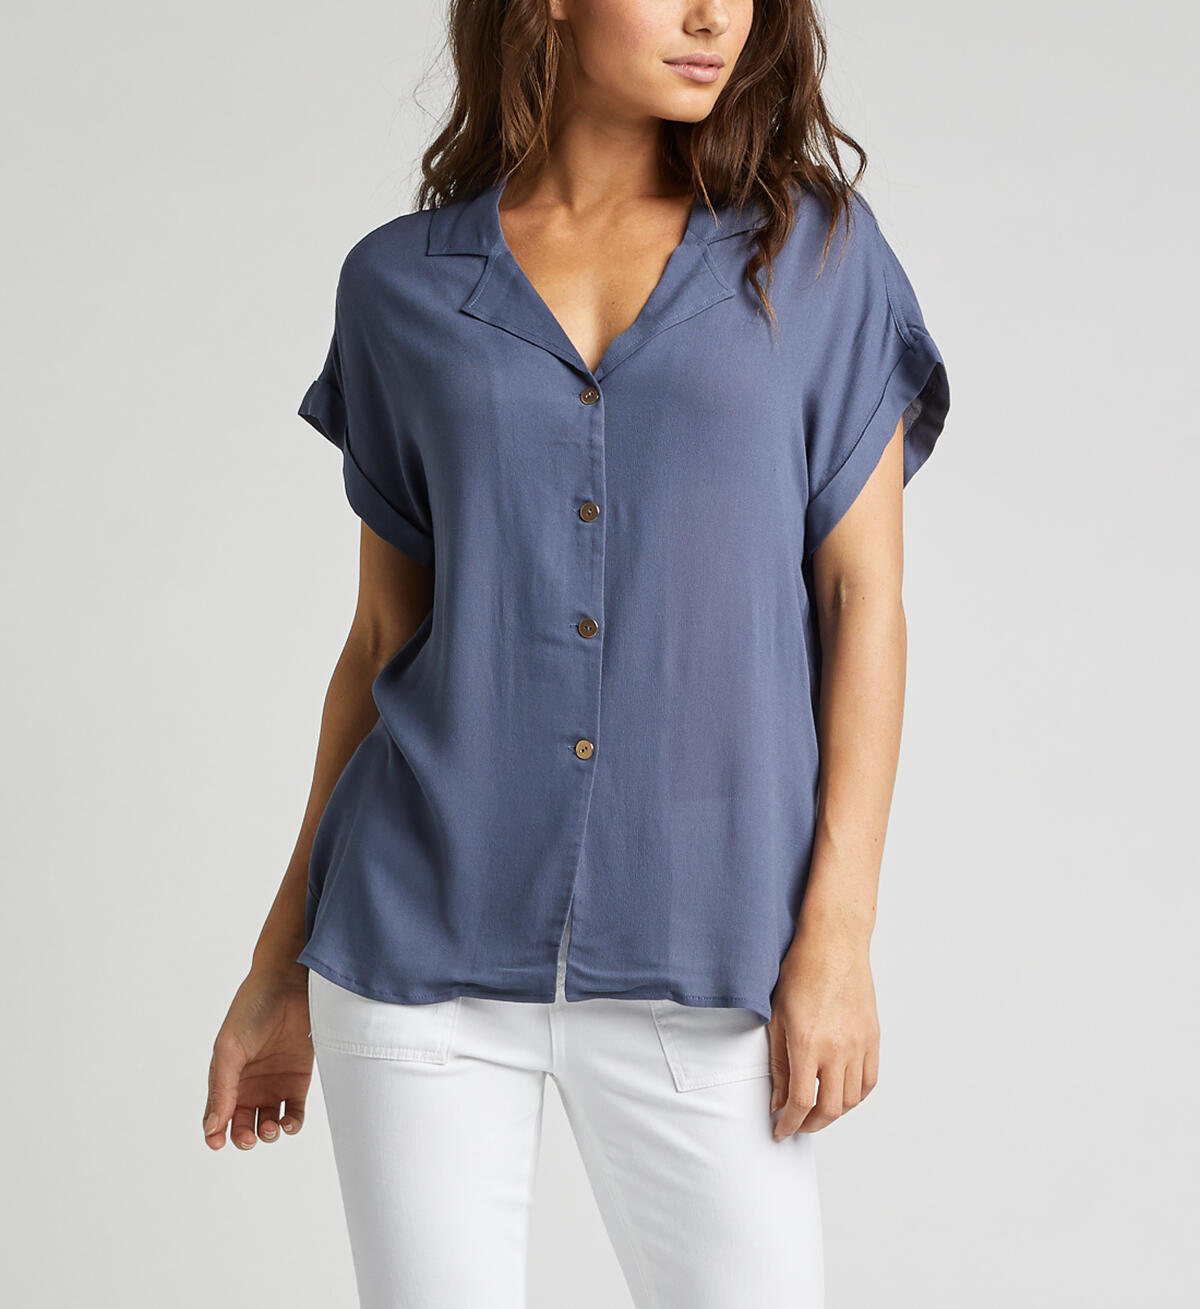 Aria Rolled-Sleeve Shirt, , hi-res image number 0